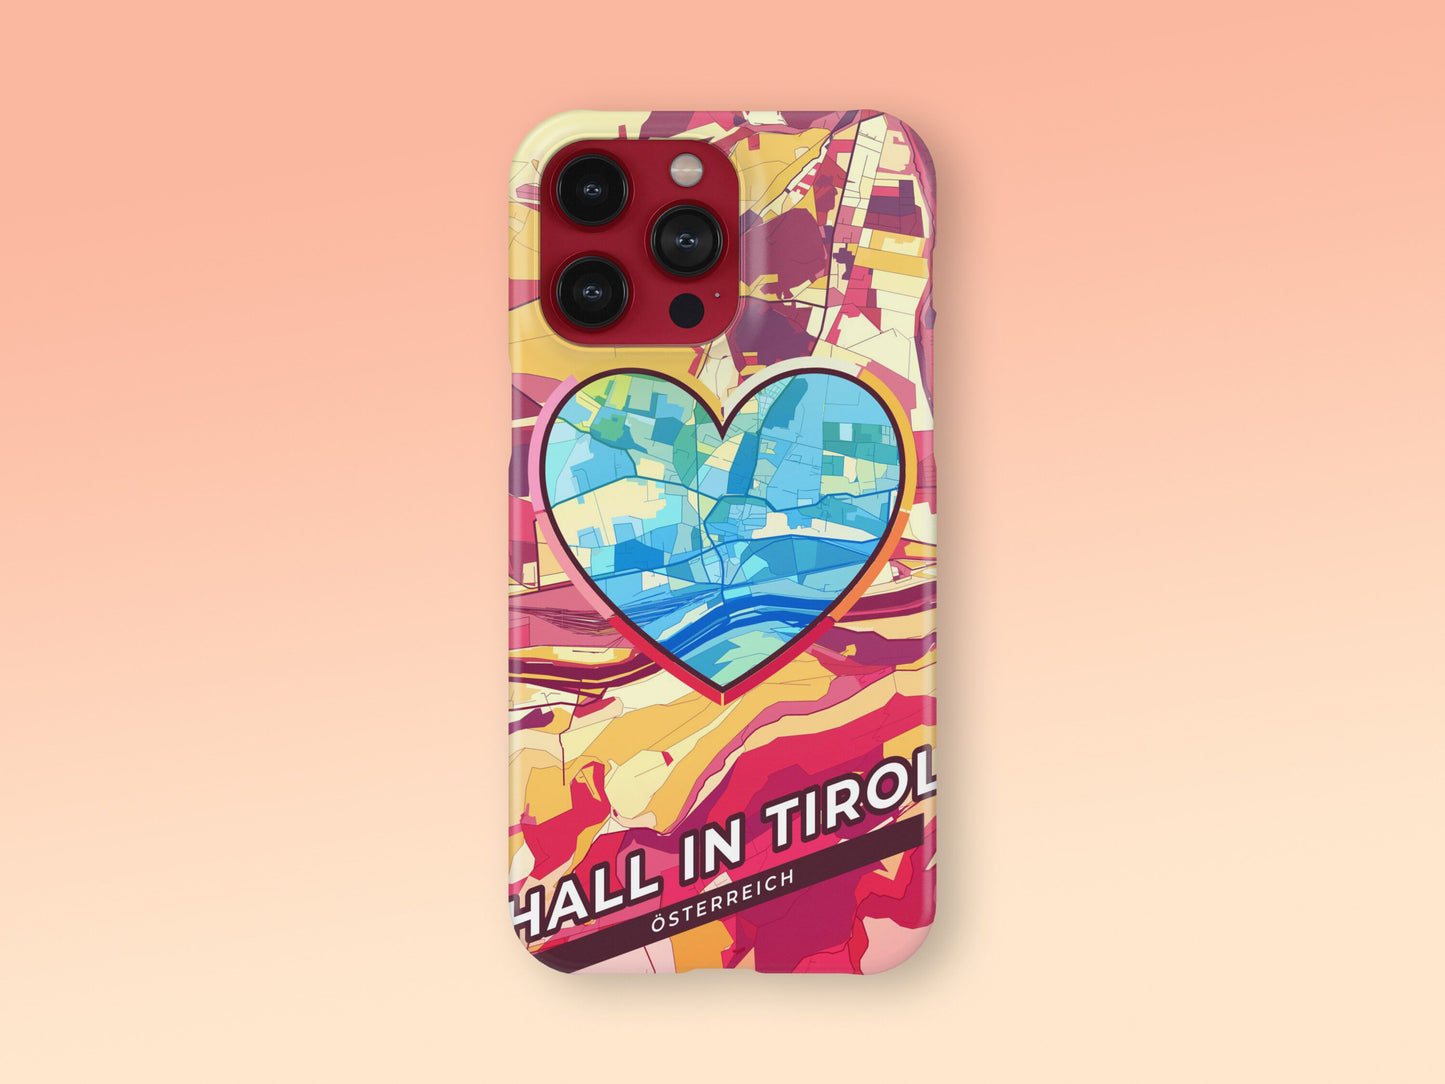 Hall In Tirol Österreich slim phone case with colorful icon. Birthday, wedding or housewarming gift. Couple match cases. 2